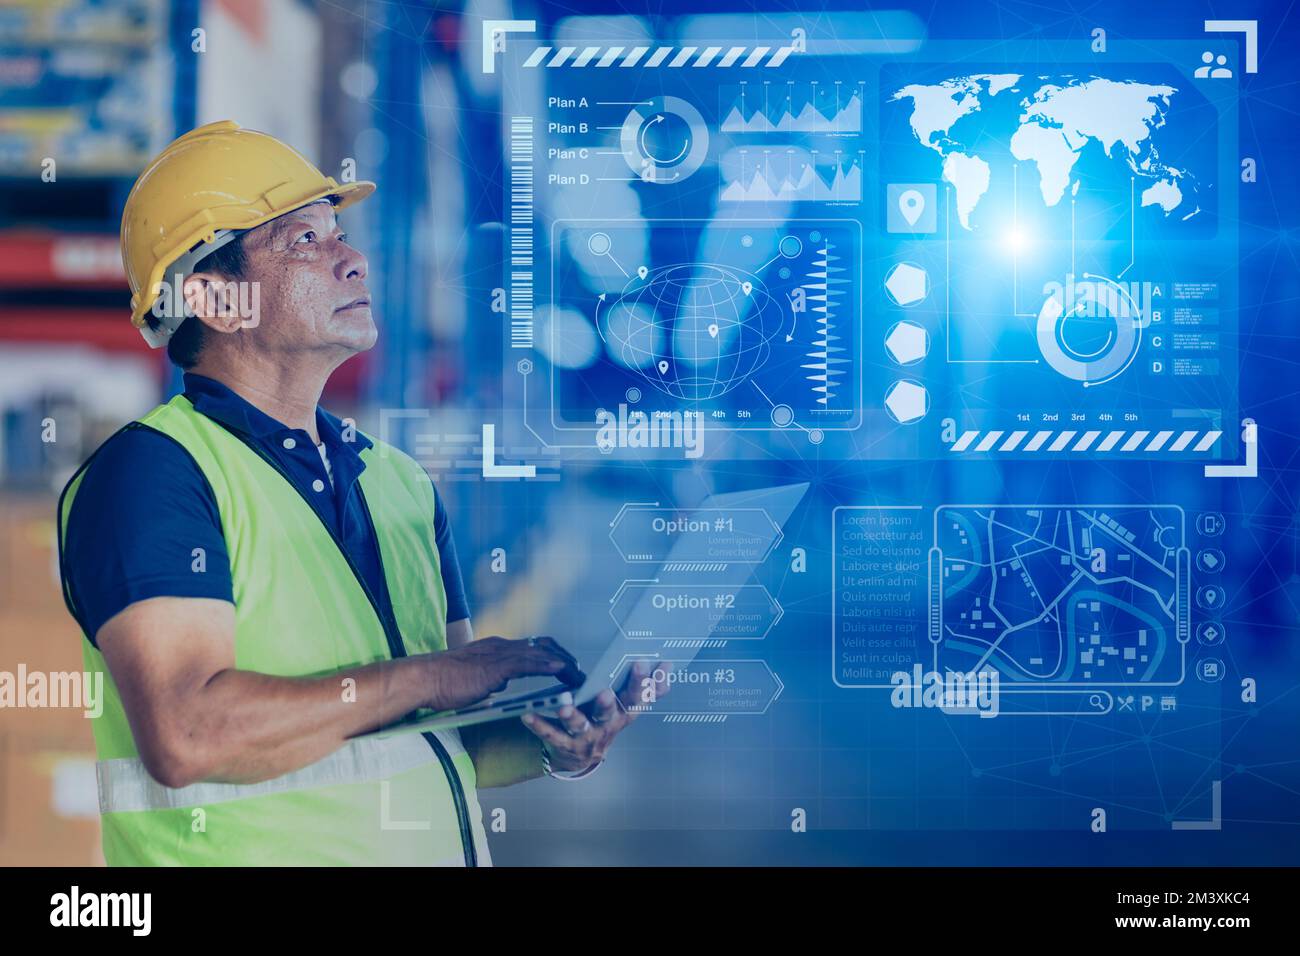 male worker using advanced digital technology hologram display world shipping information modern industry 5.0 concept Stock Photo